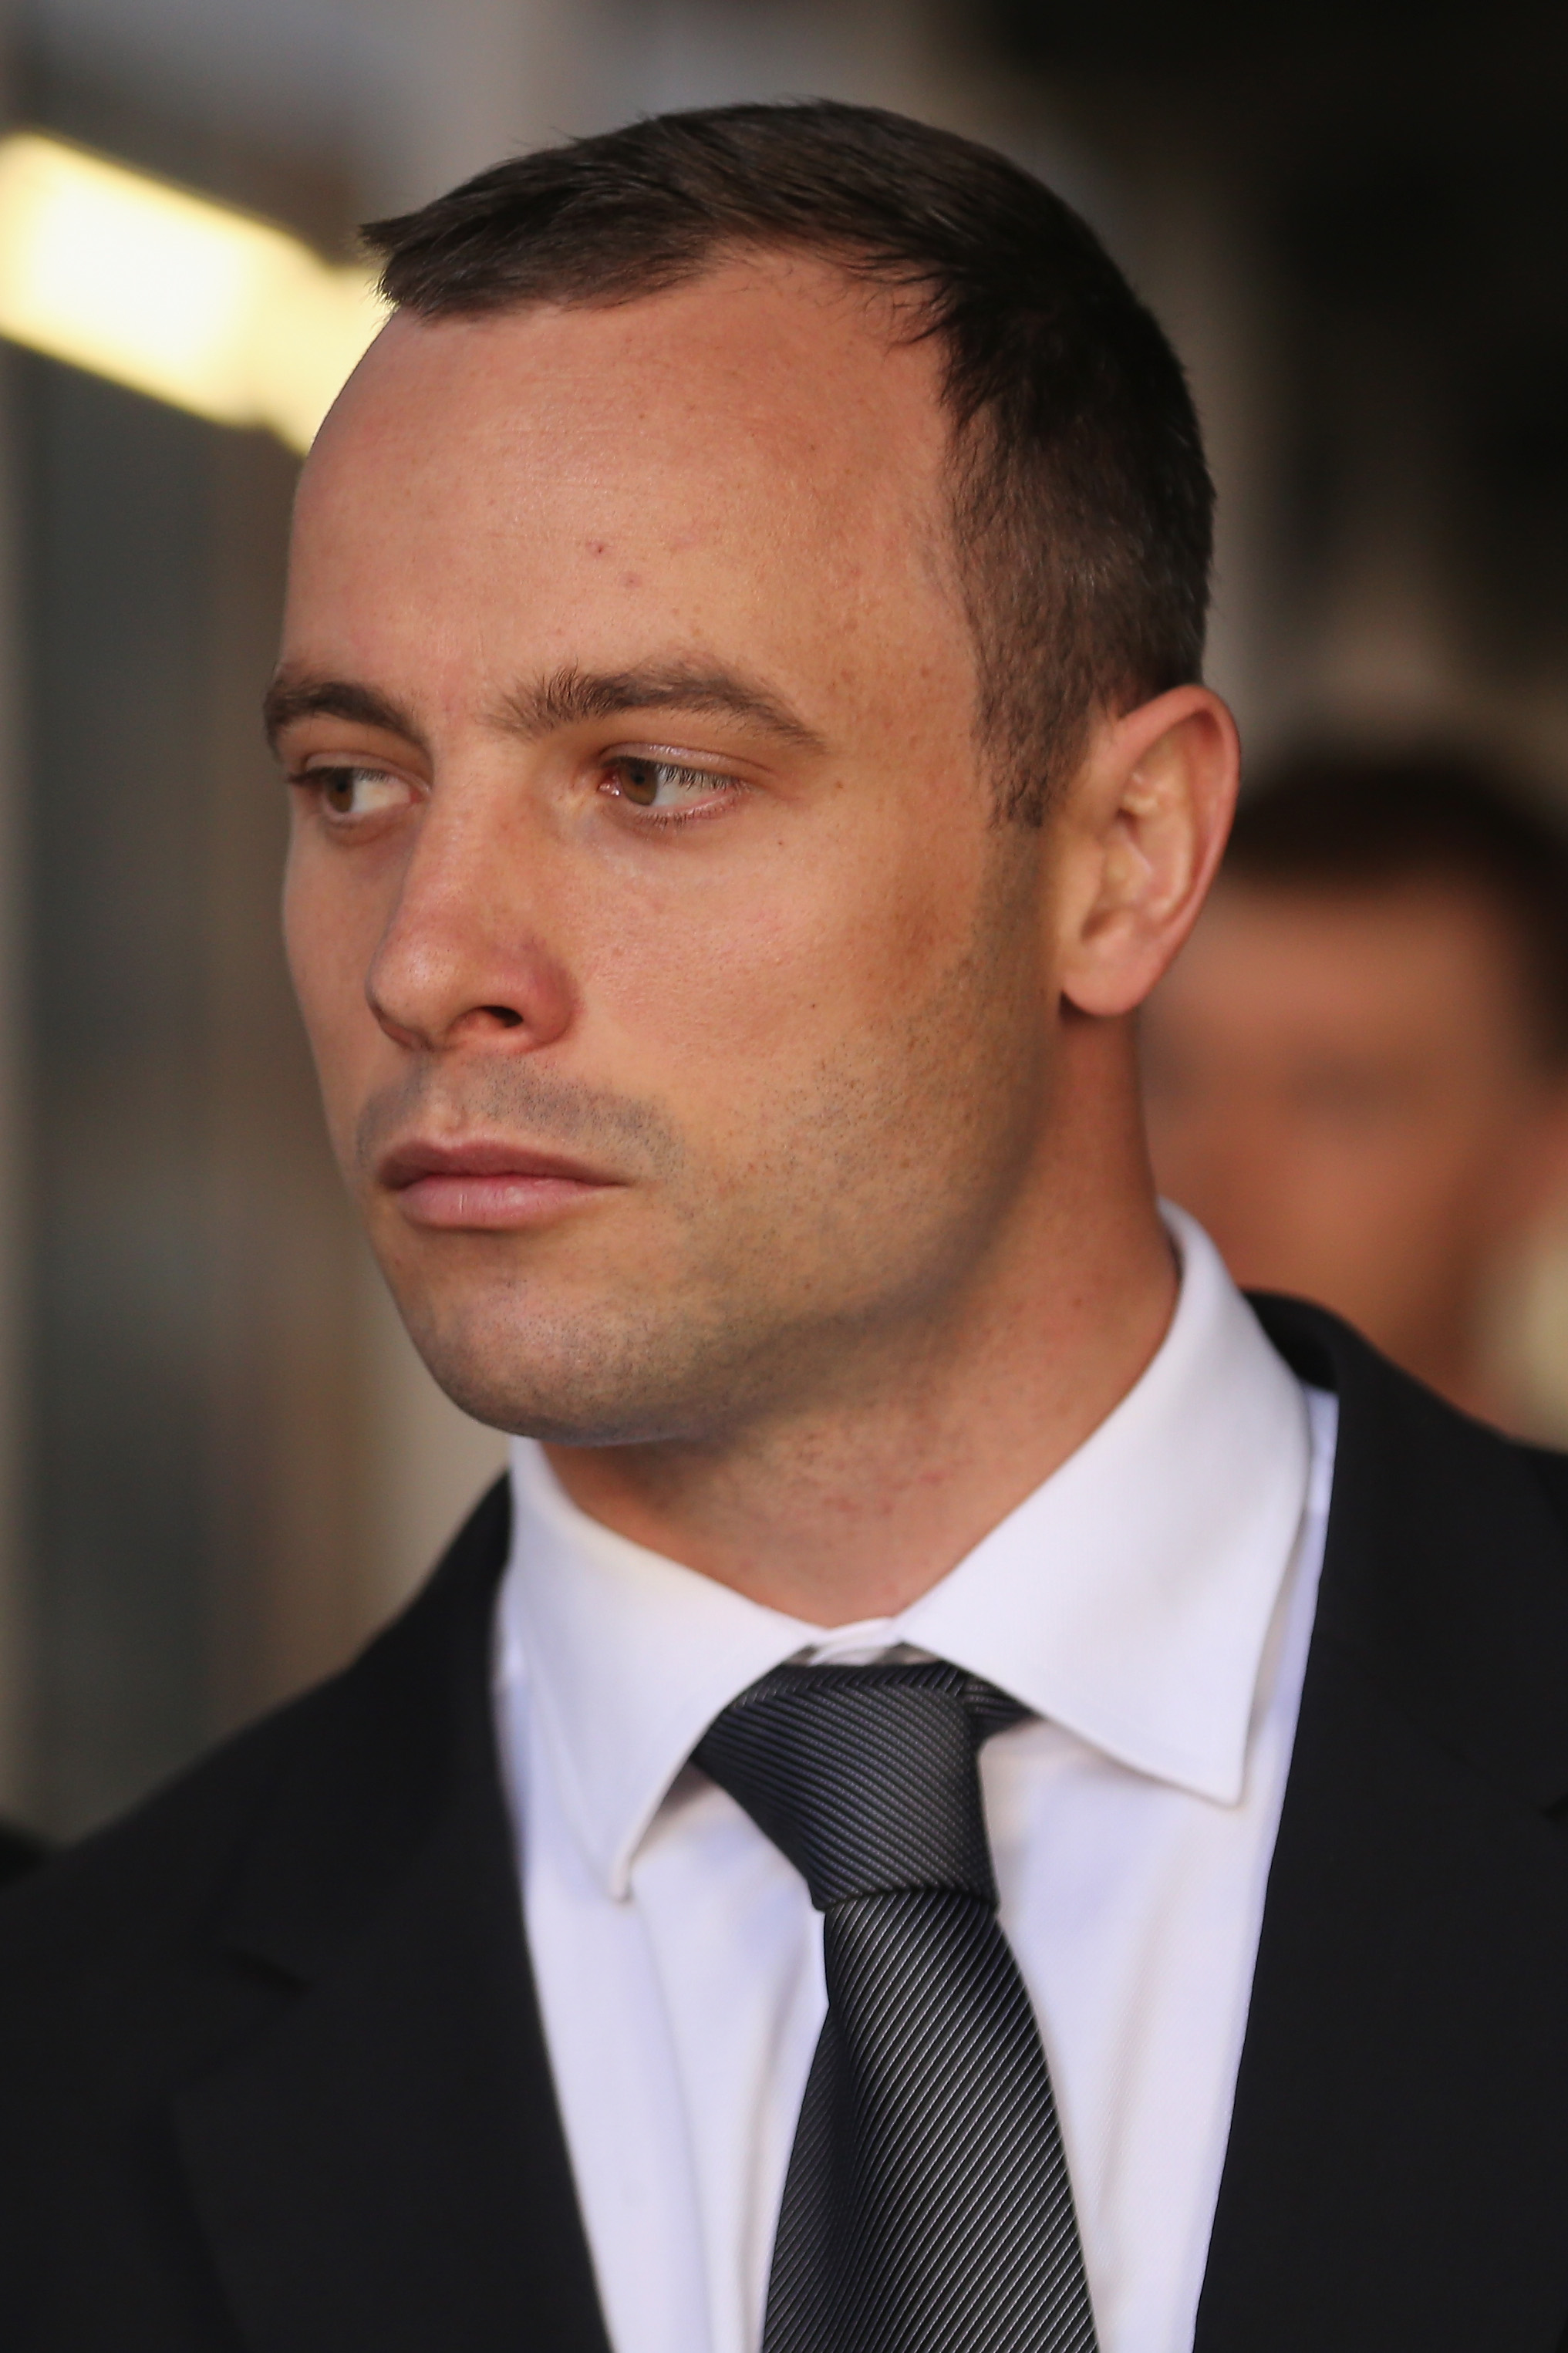 Oscar Pistorius leaves North Gauteng High Court after the judge ordered that he should undergo mental evaluation on May 14, 2014 in Pretoria, South Africa. (Christopher Furlong&amp;mdash;Getty Images)